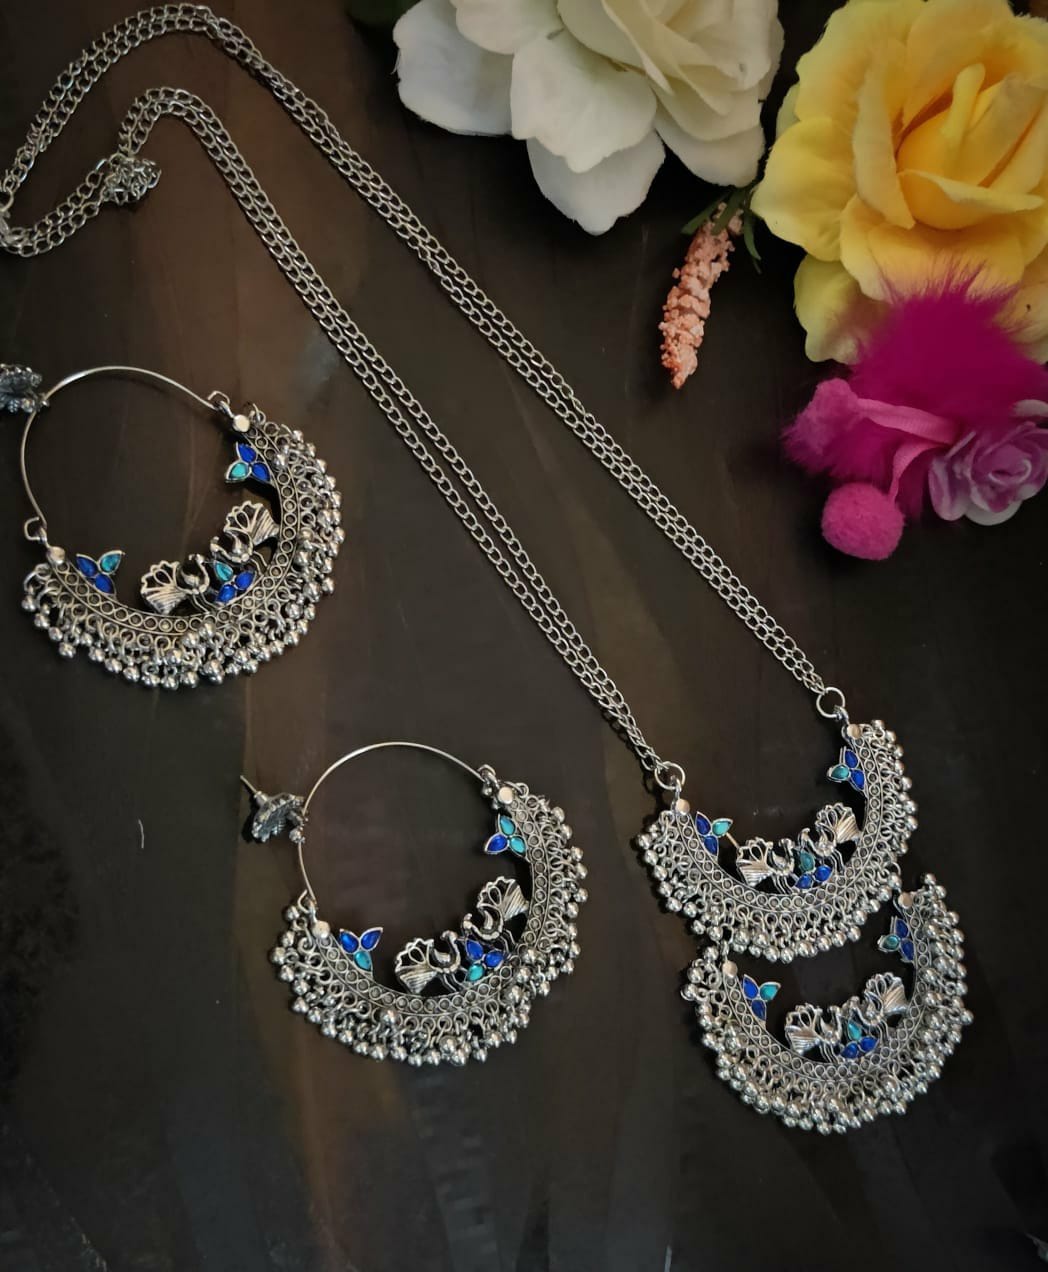 Oxidized Peacock Jewelry Necklace Set - The Indian Rang